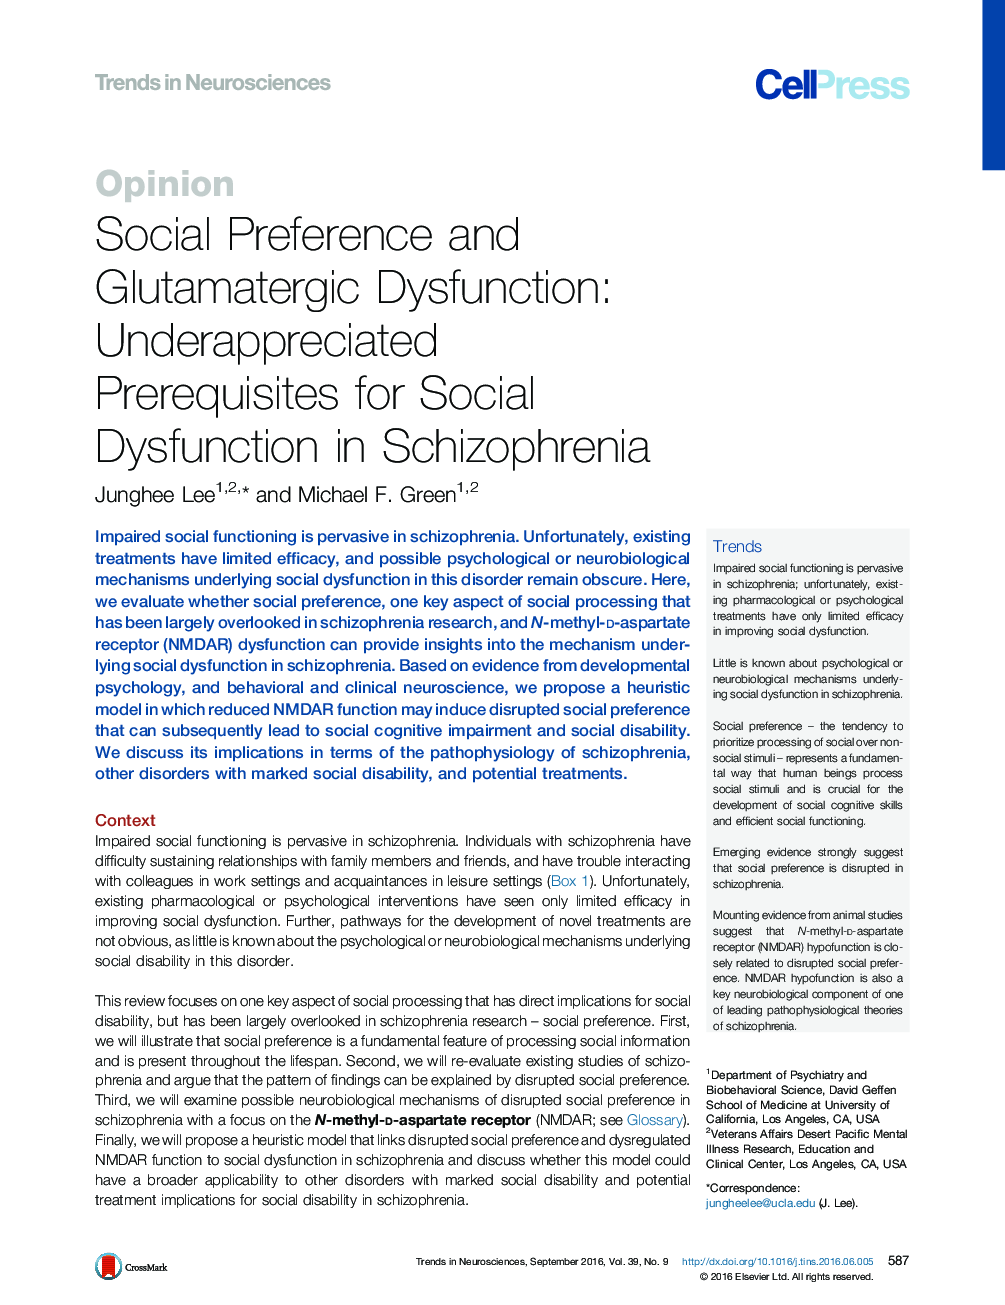 Social Preference and Glutamatergic Dysfunction: Underappreciated Prerequisites for Social Dysfunction in Schizophrenia